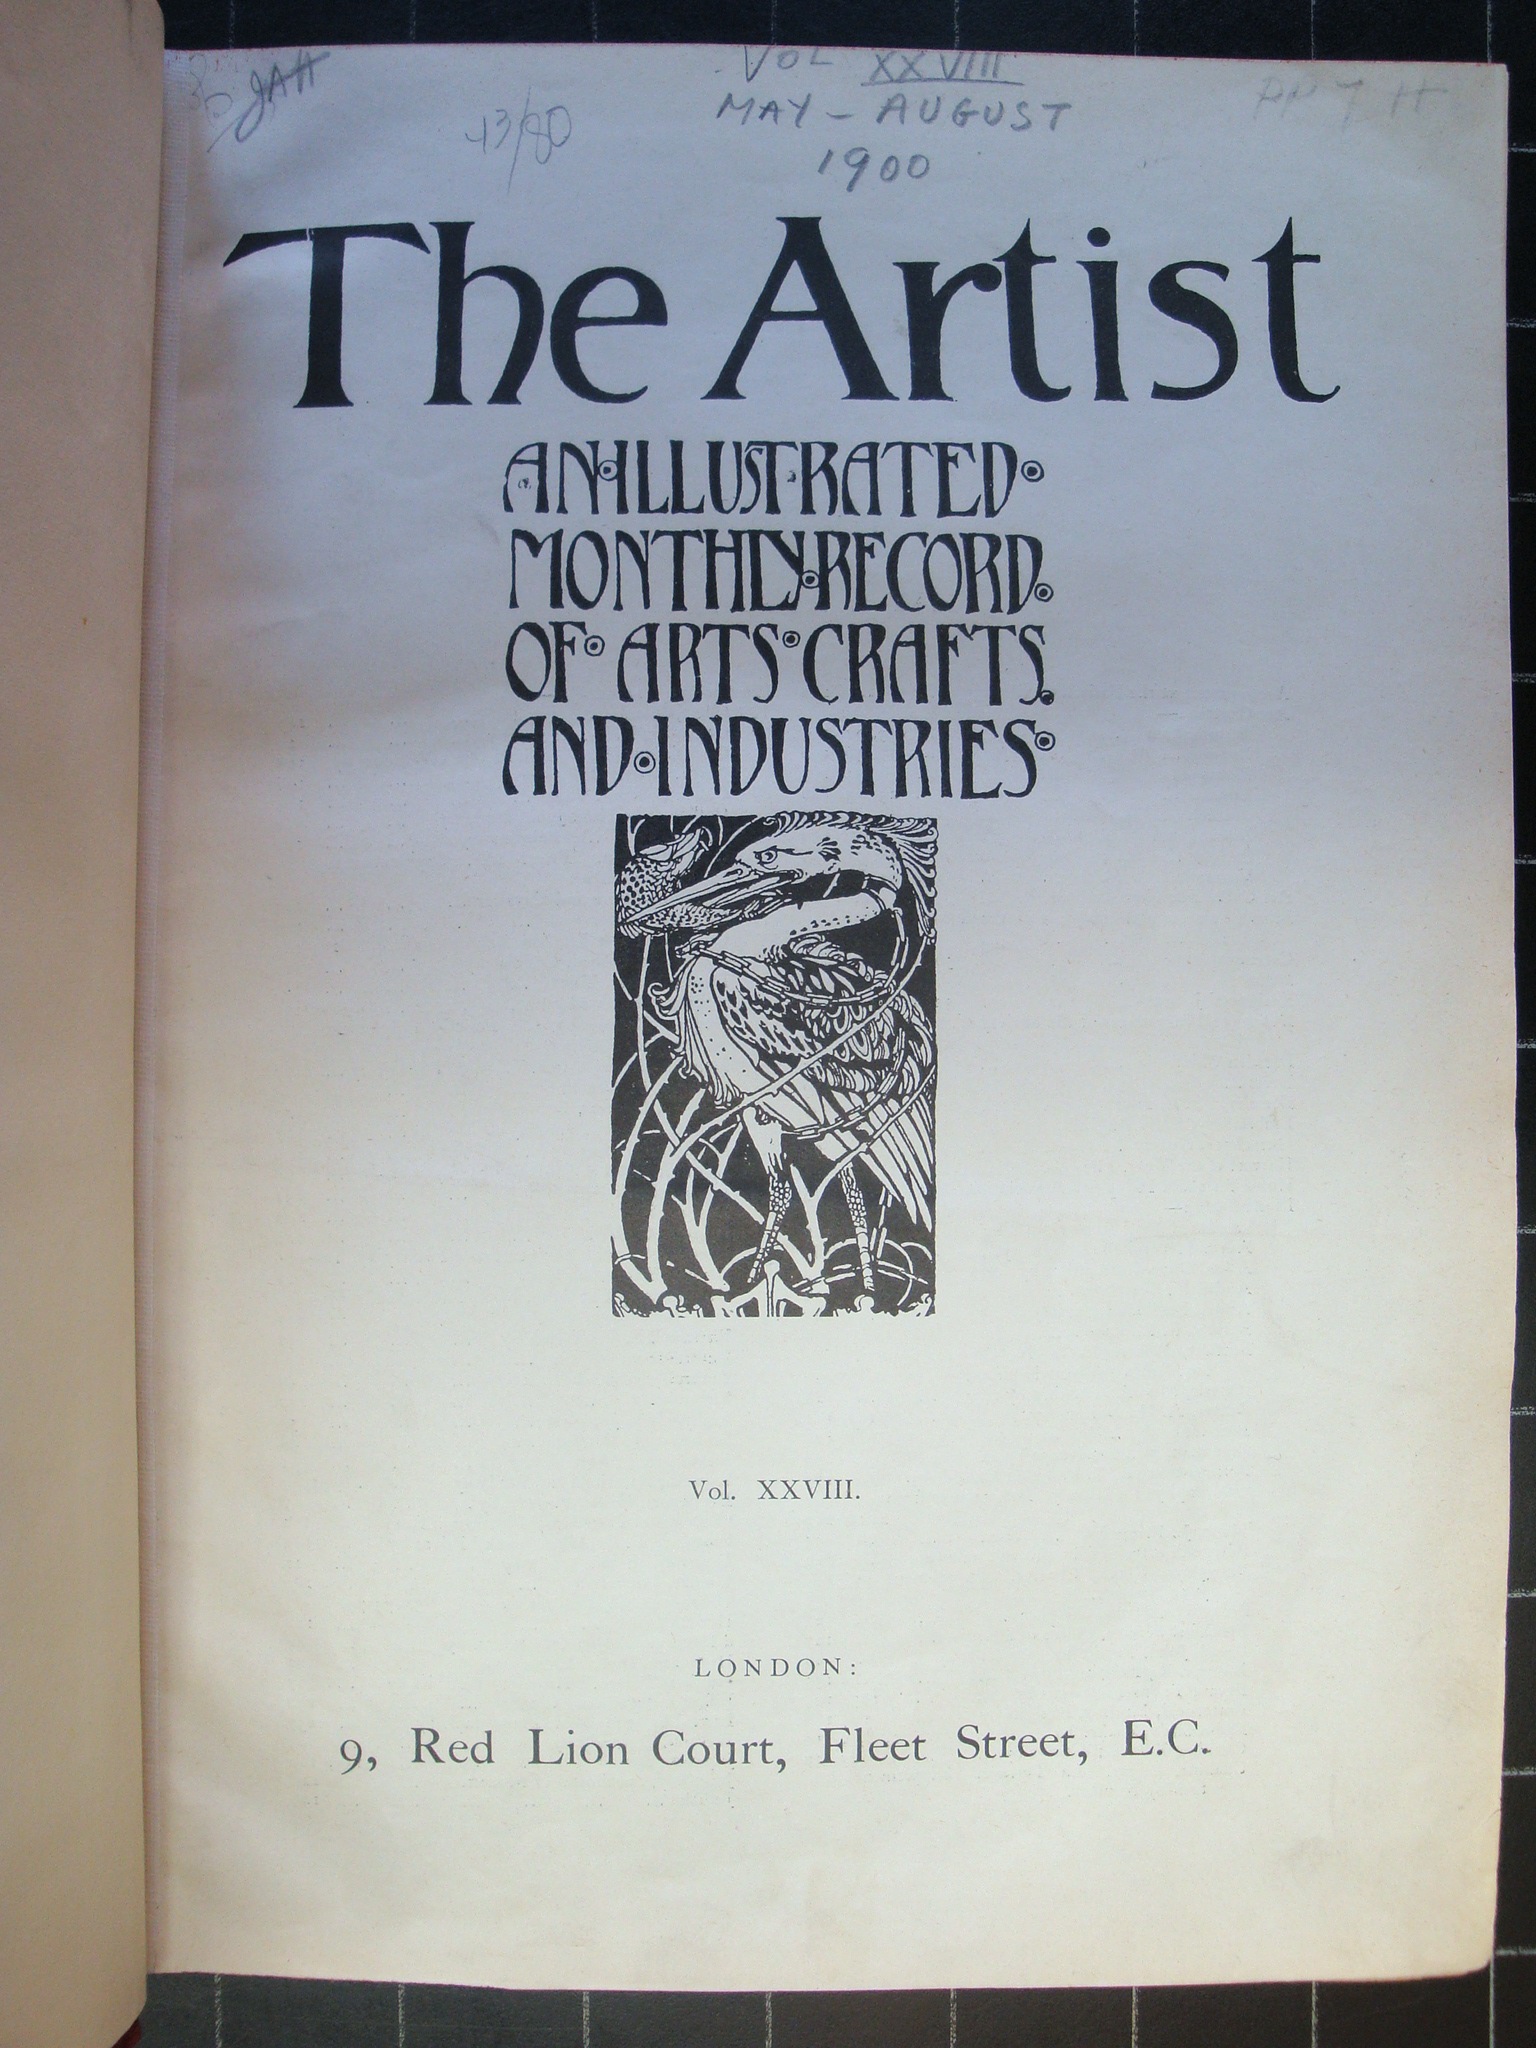 The Artist 1900 - Front Cover